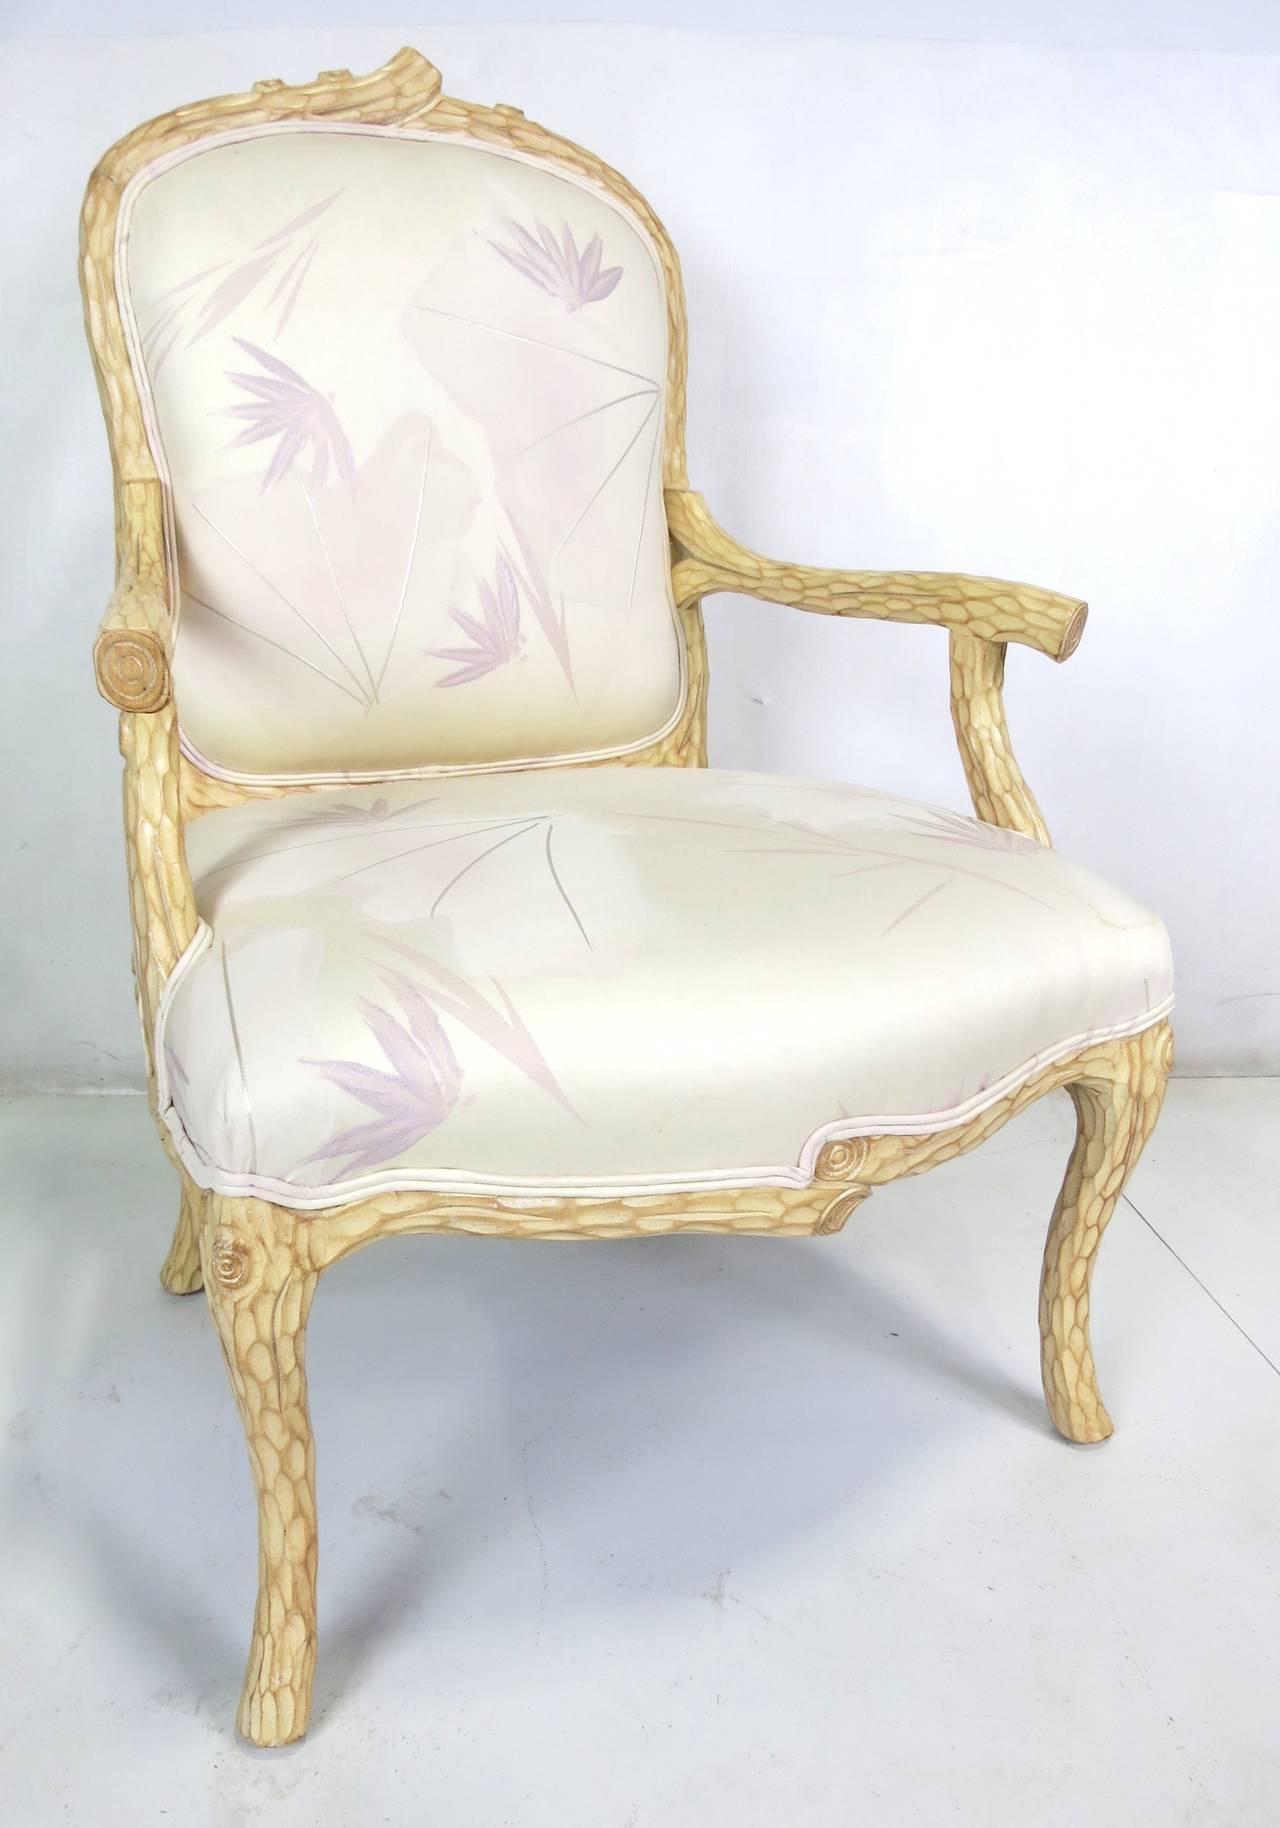 Beautifully carved pair of faux bois armchairs with their original period upholstery. The chairs and their upholstery appears as new and unused.